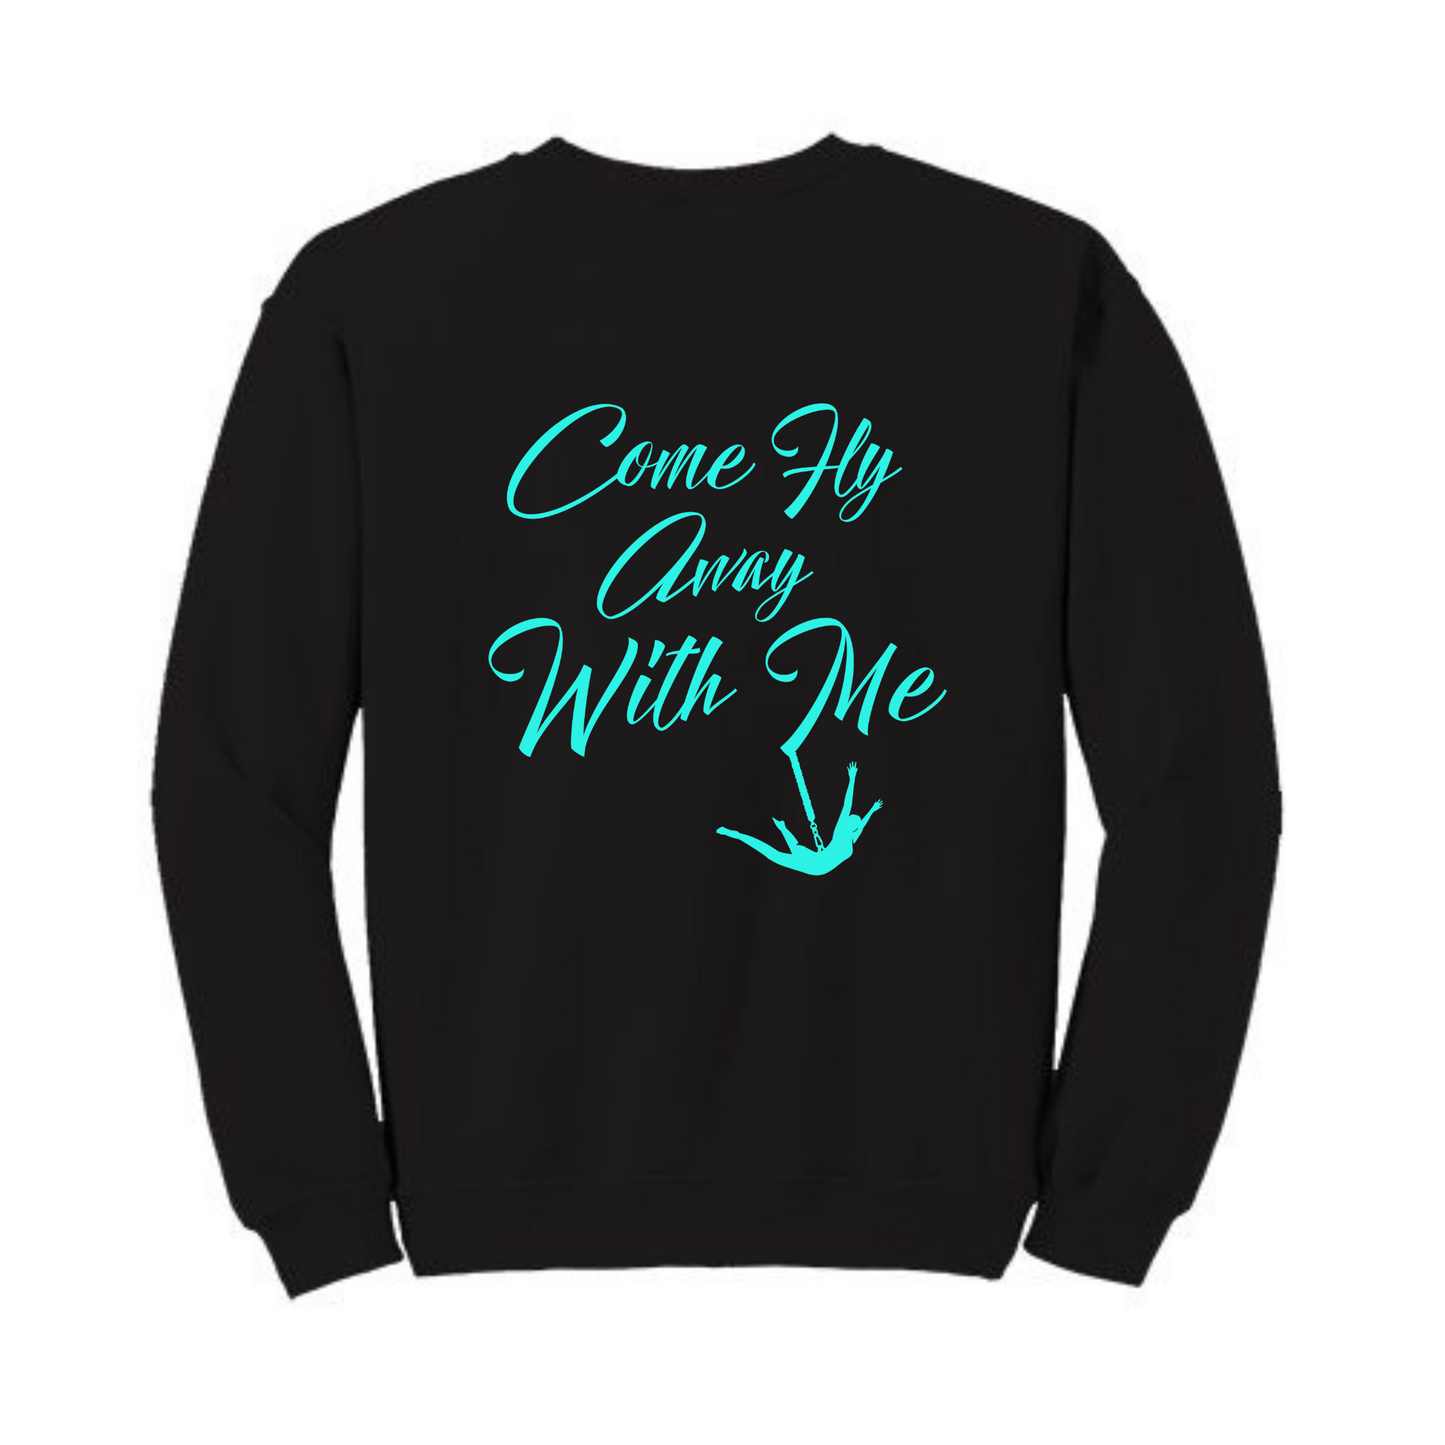 Come Fly Away with Me Bungee Grid  Two Sided Crewneck